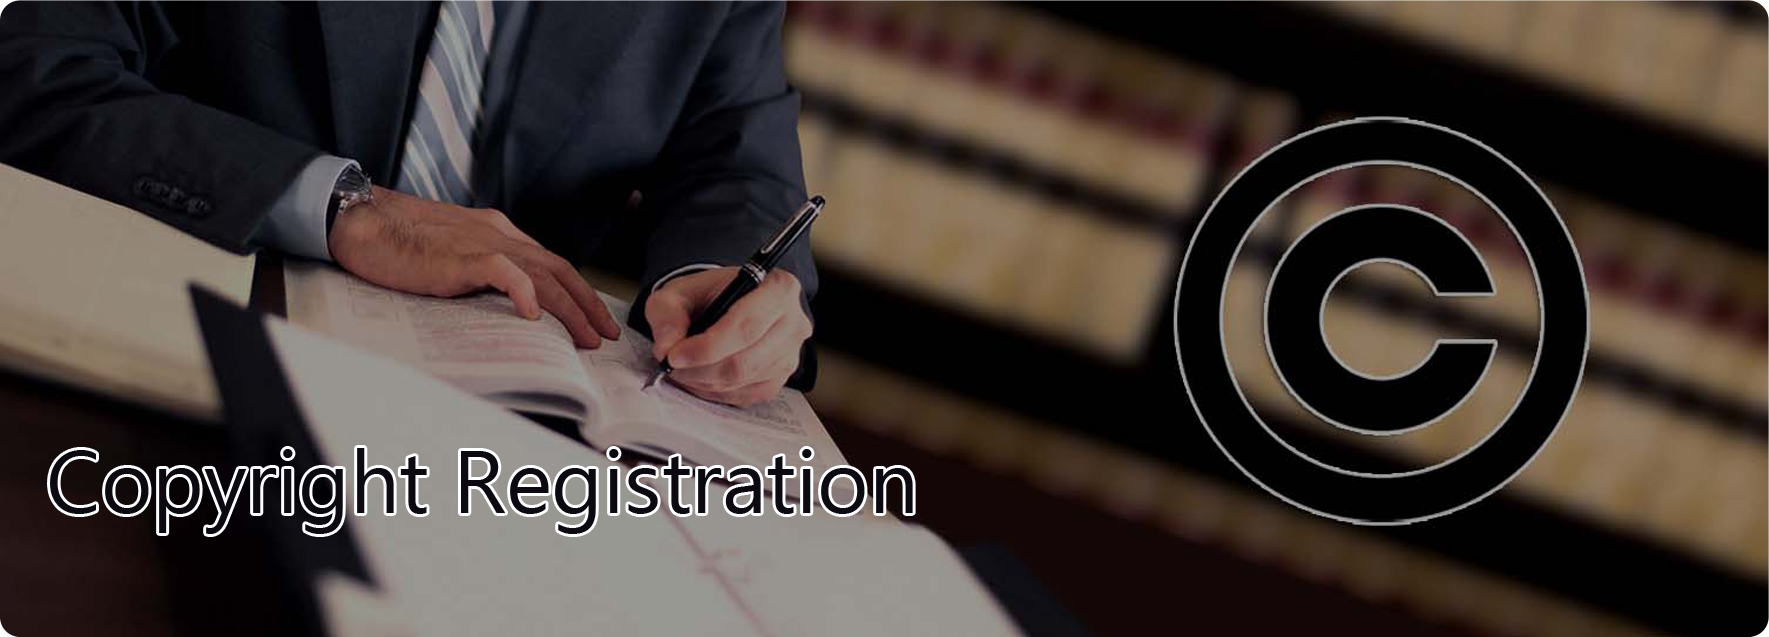 Apply for Copyright Registration Now